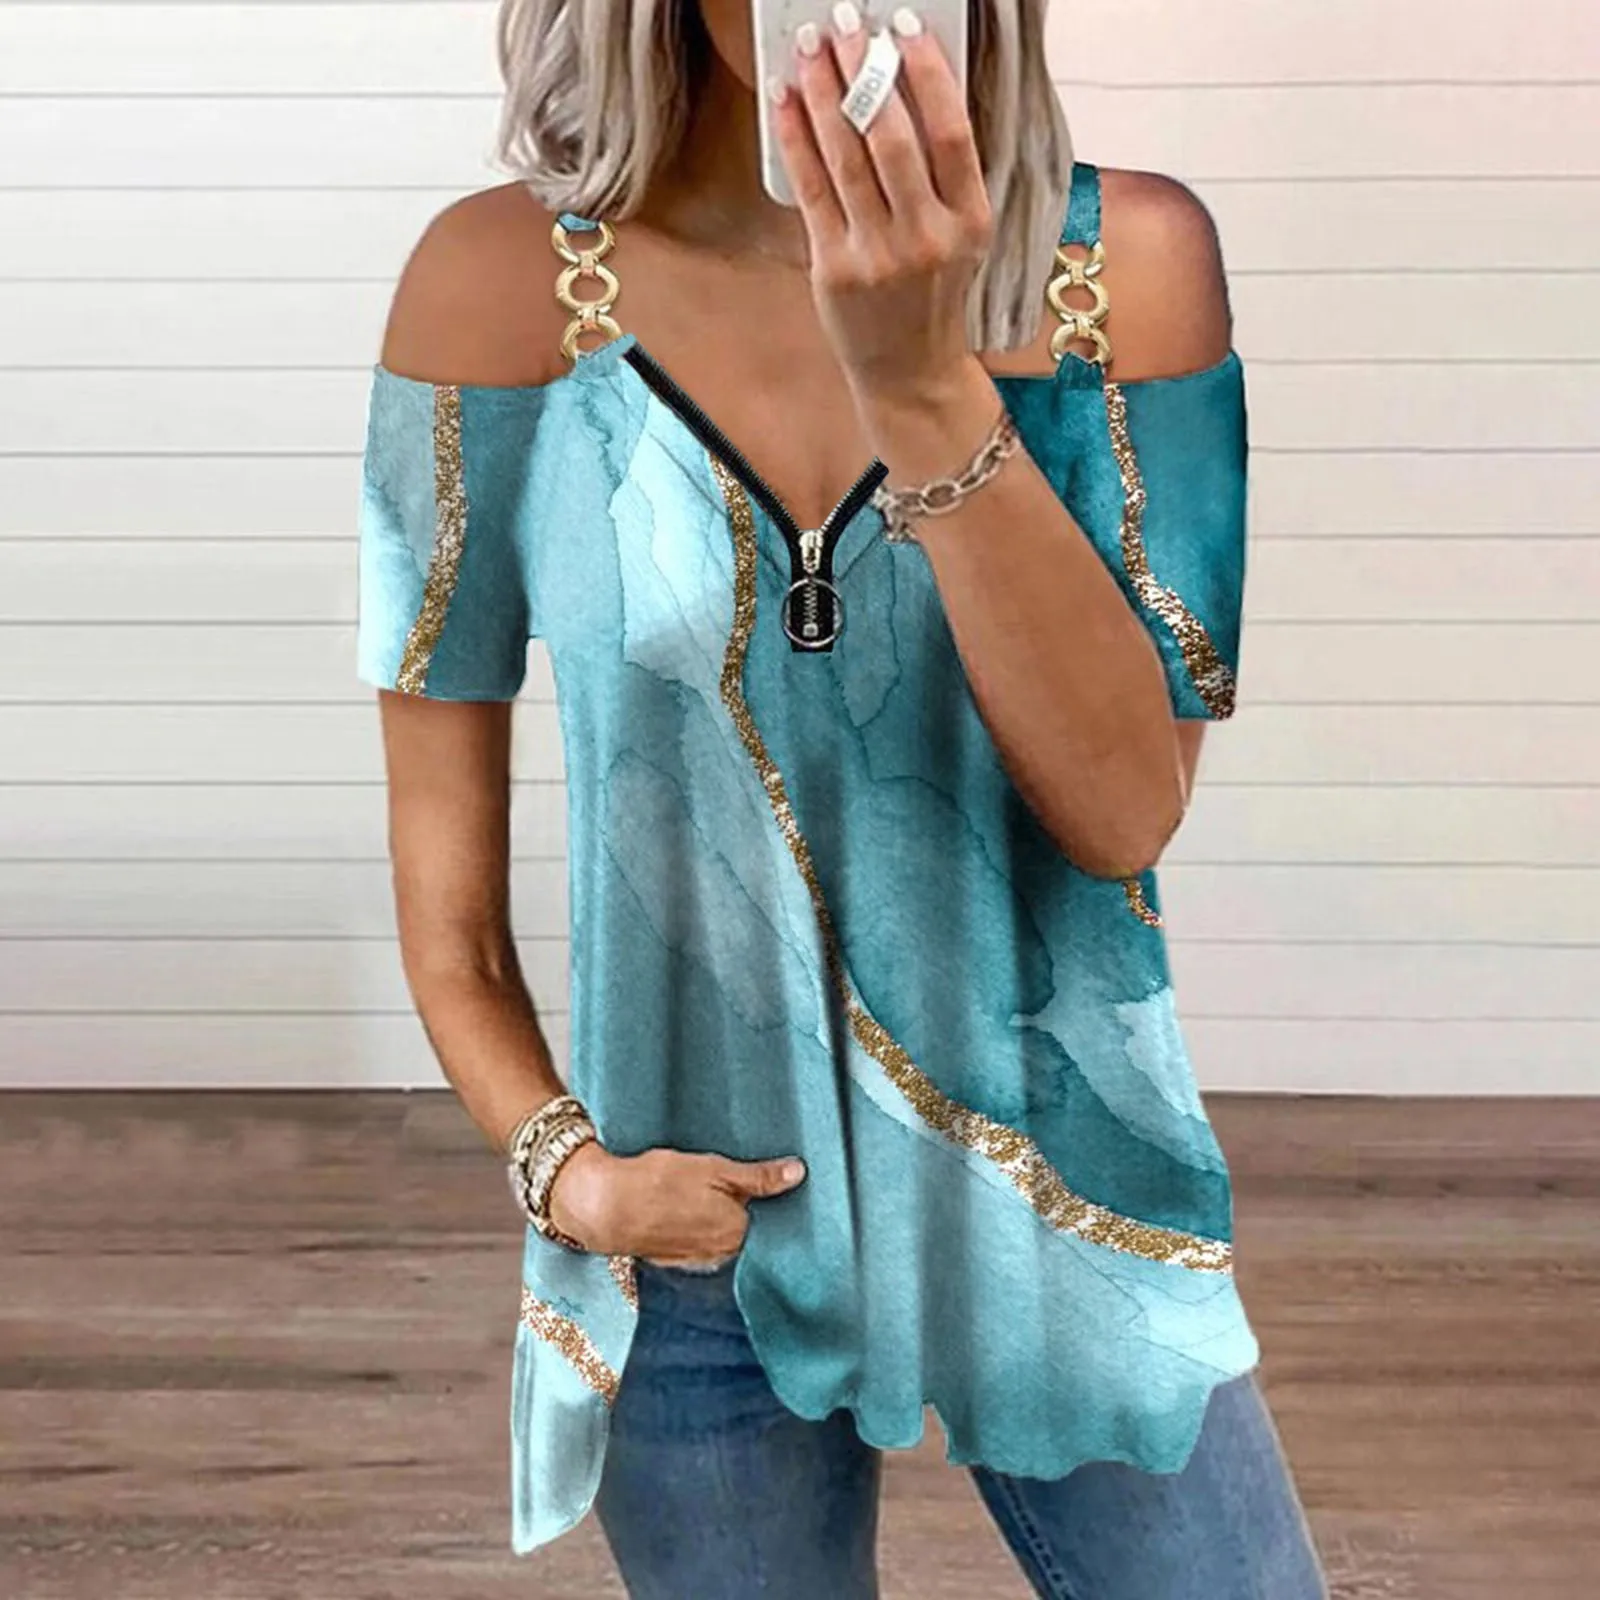 

Womens Blouse Off-the-shoulder Short-sleeve Tops Summer Prints Casual Shirts Blusas Loose Chemise Tunic Female Blusas Chemise R5